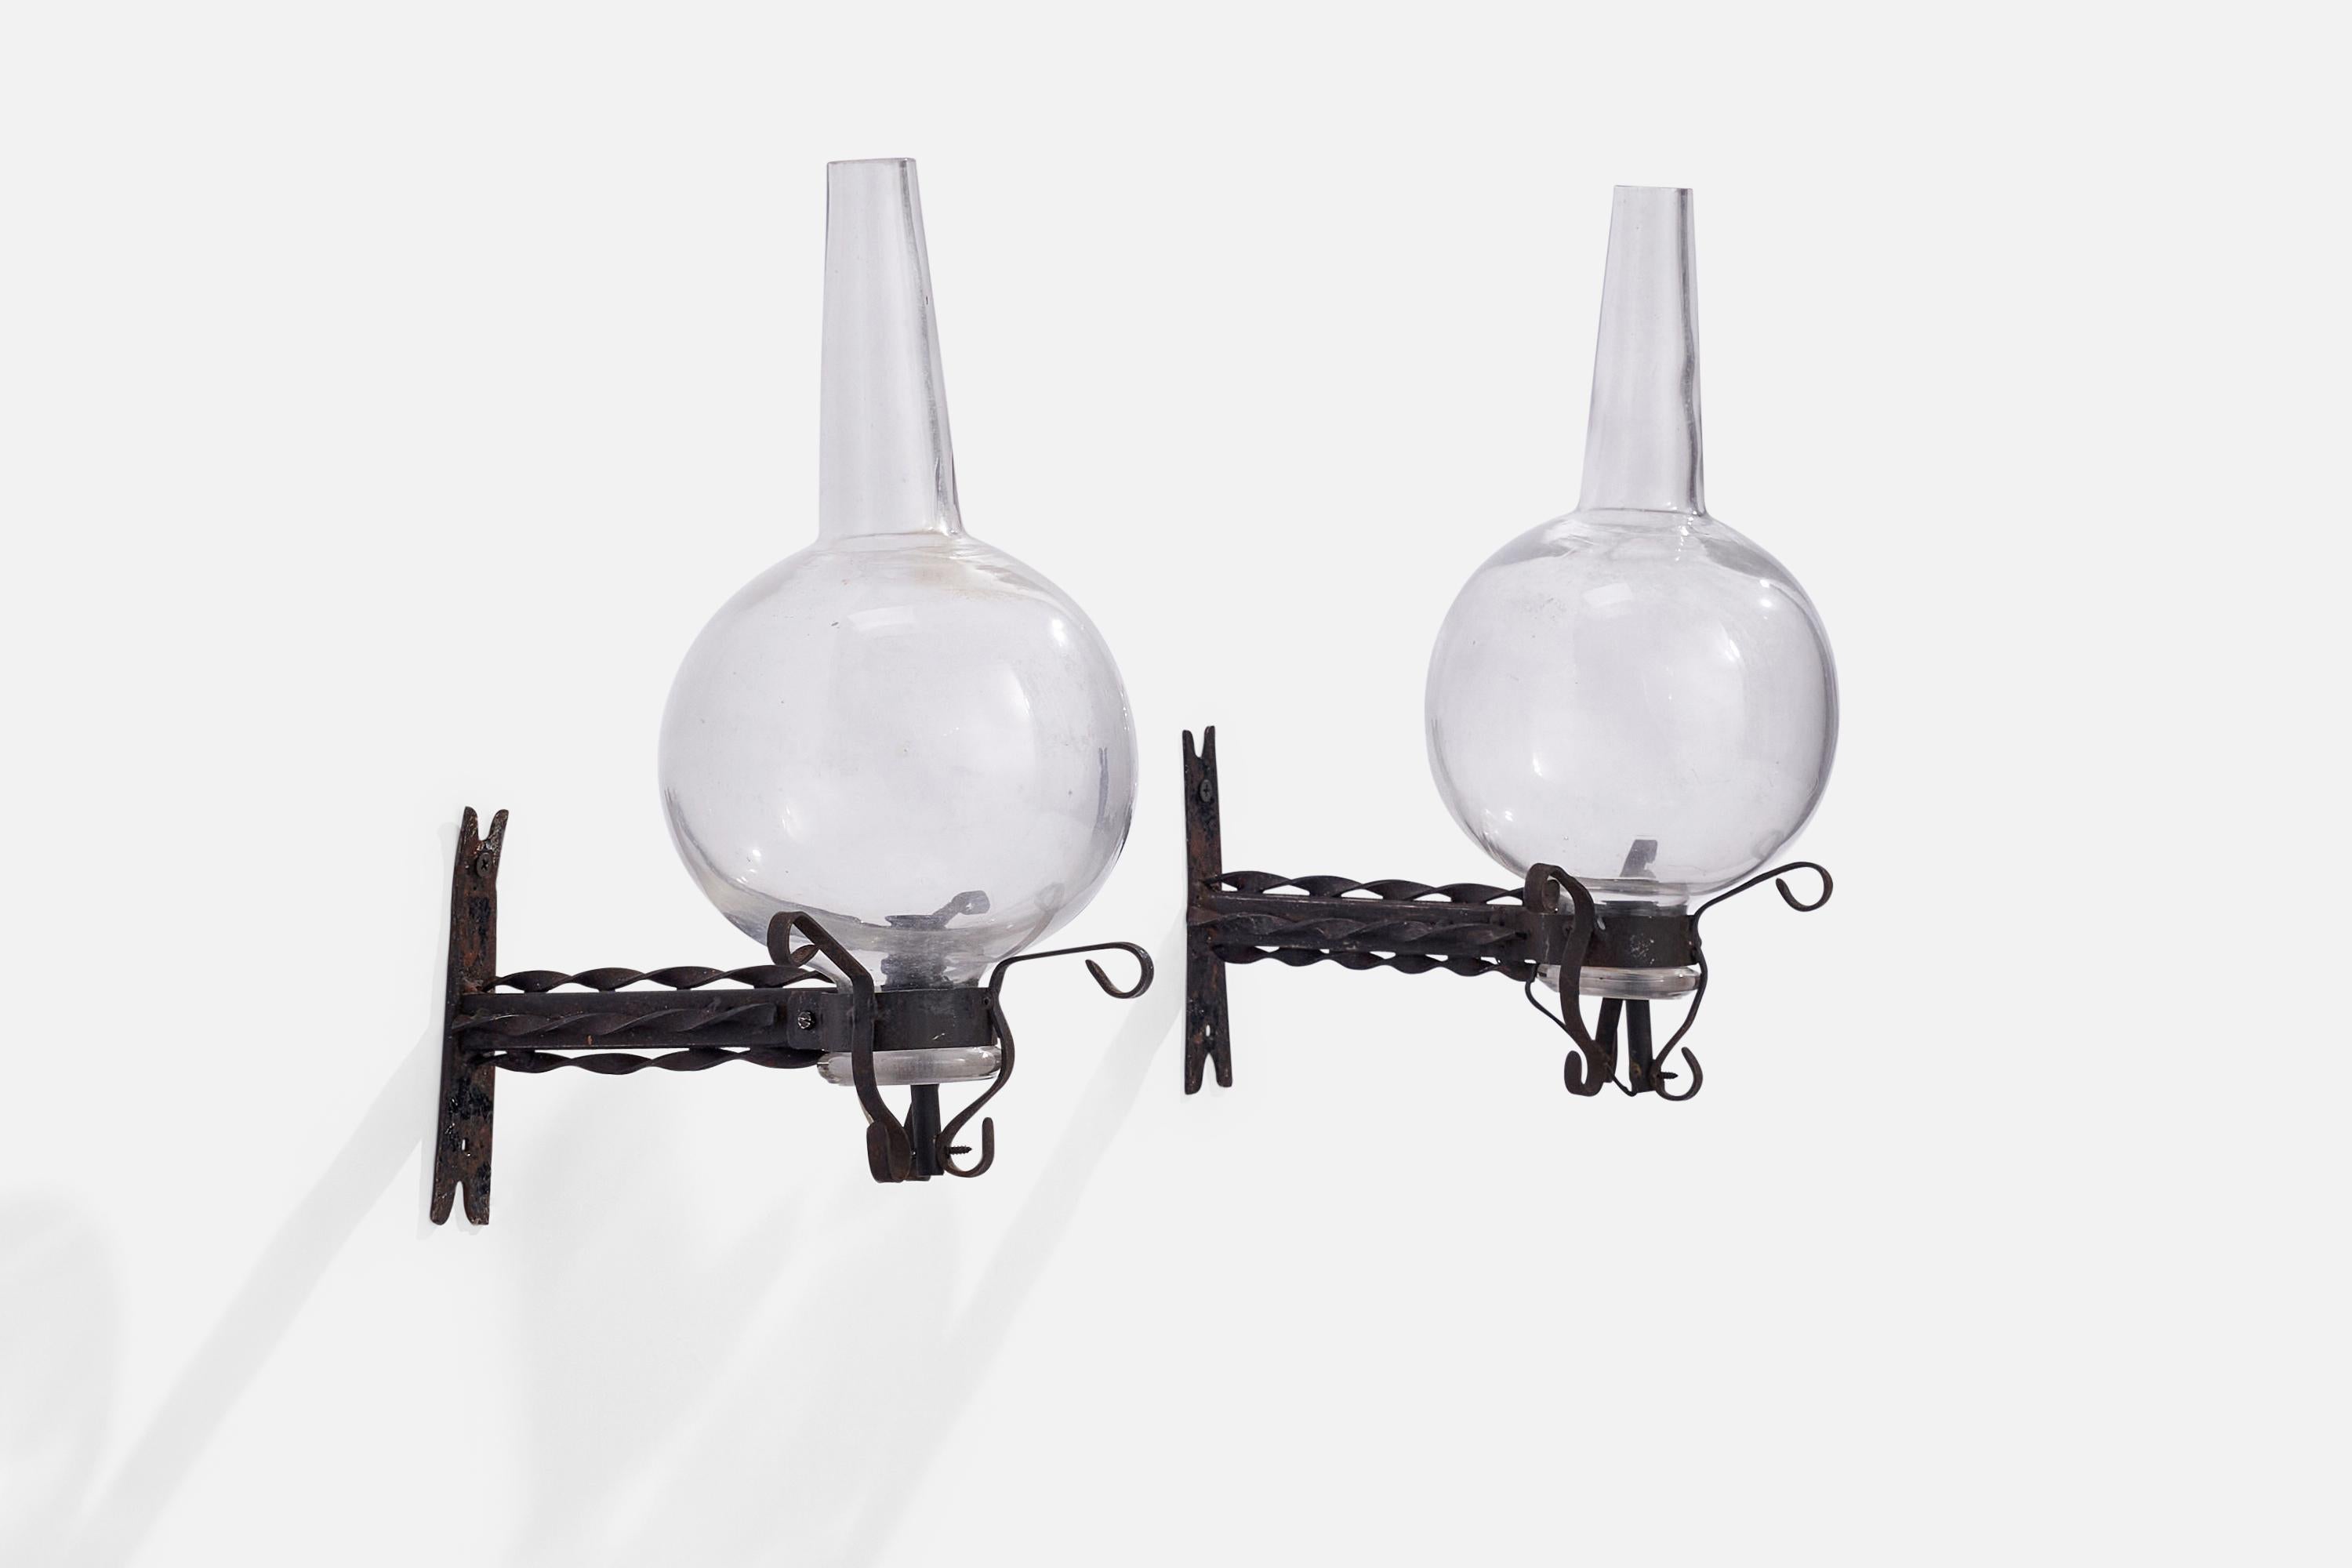 A pair of wrought iron and glass wall lights designed and produced in Italy, 1930s.

Overall Dimensions (inches): 14.5” H x 6”  W x 10”  D
Back Plate Dimensions (inches): 5.5” H x 1.25” W x .25” D
Bulb Specifications: E-14 Bulb
Number of Sockets: